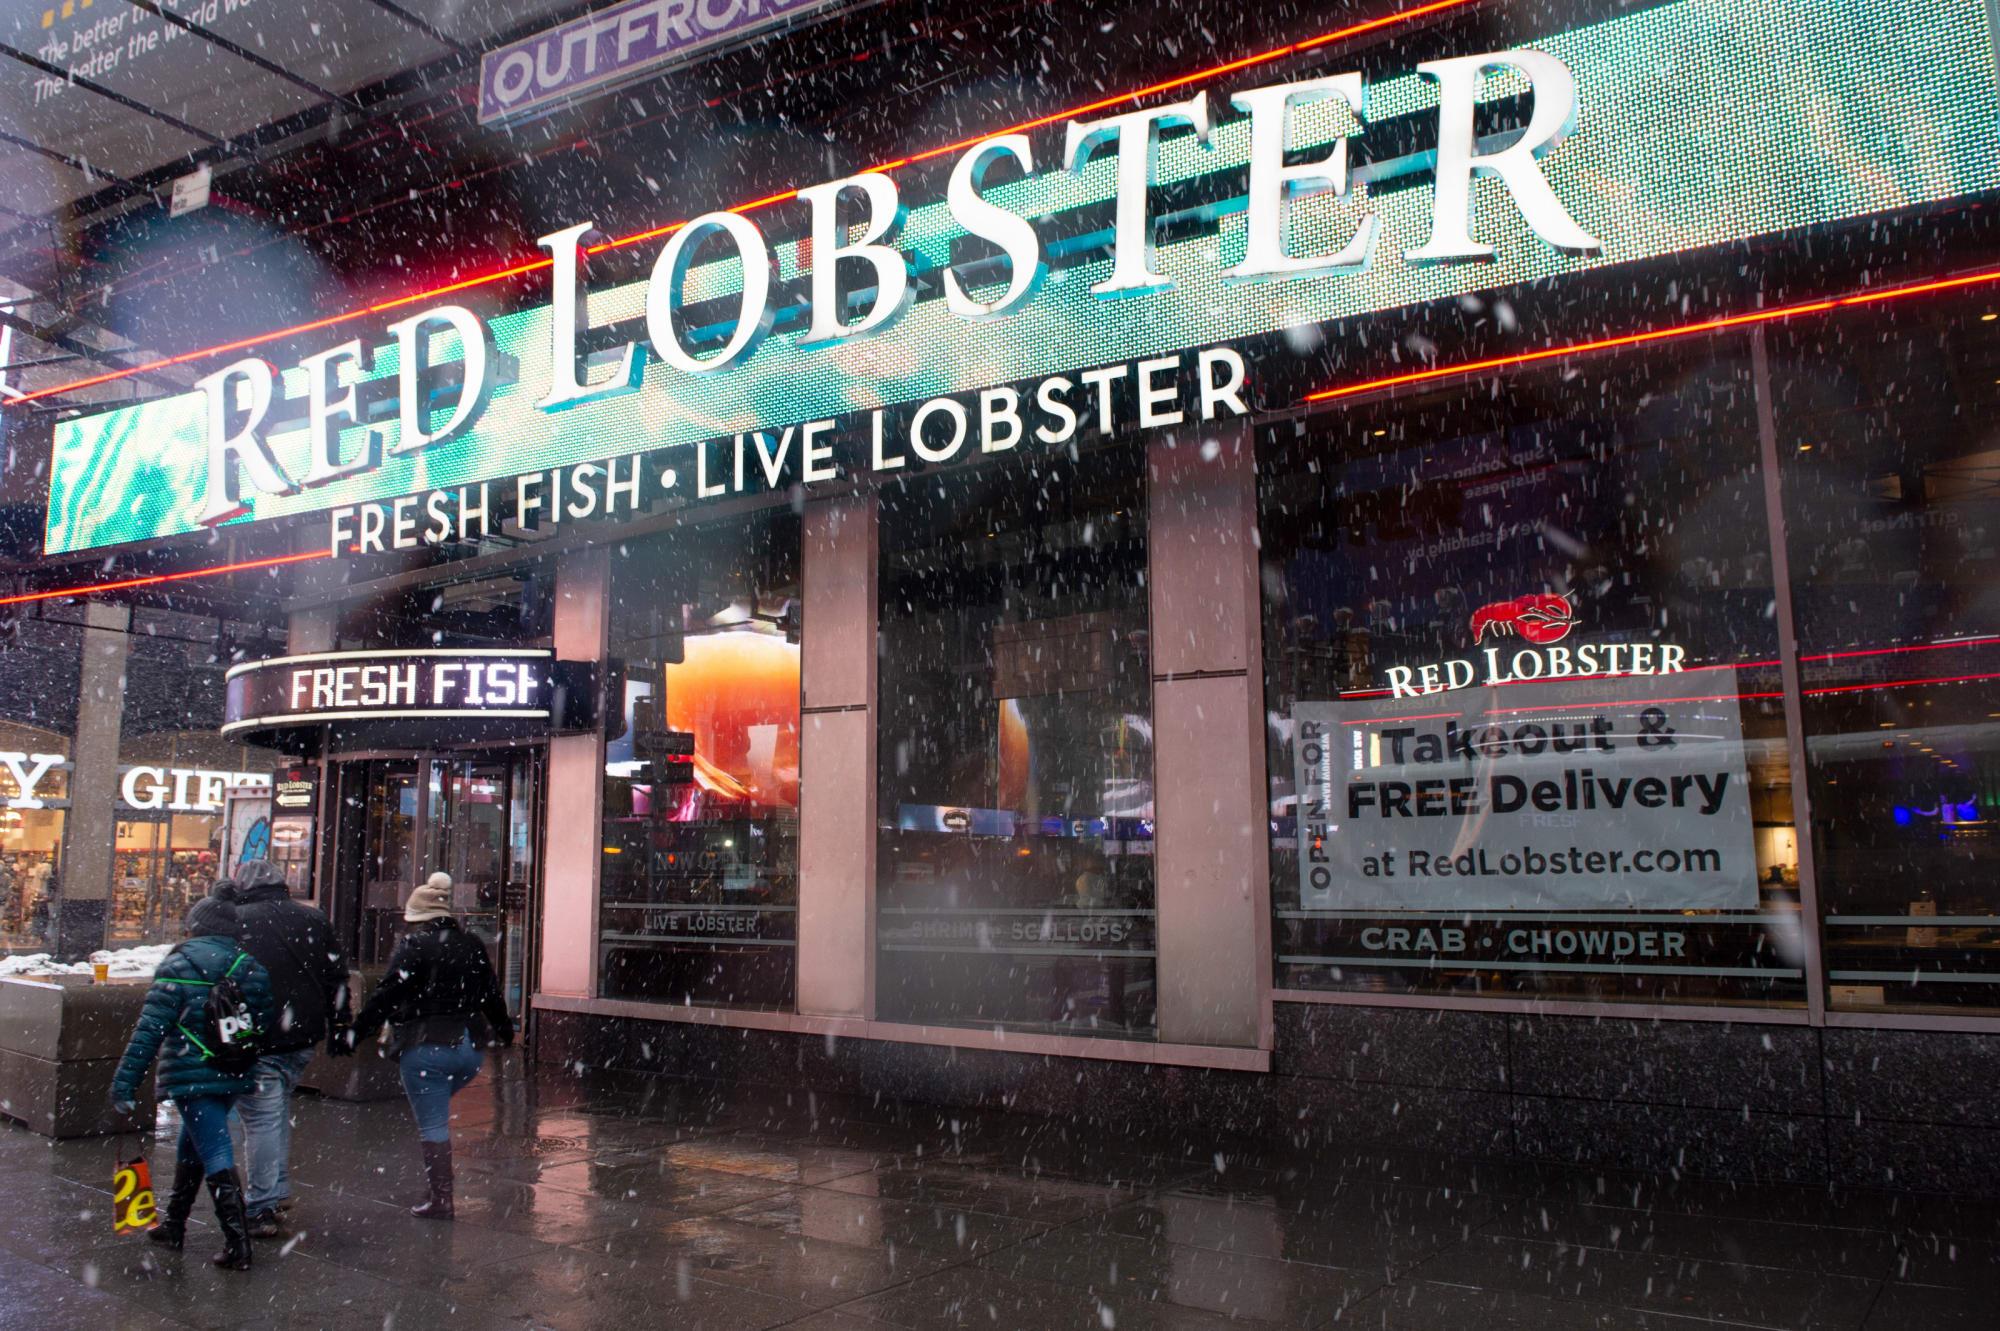 Red Lobster is offering a limited time deal on Veterans Day